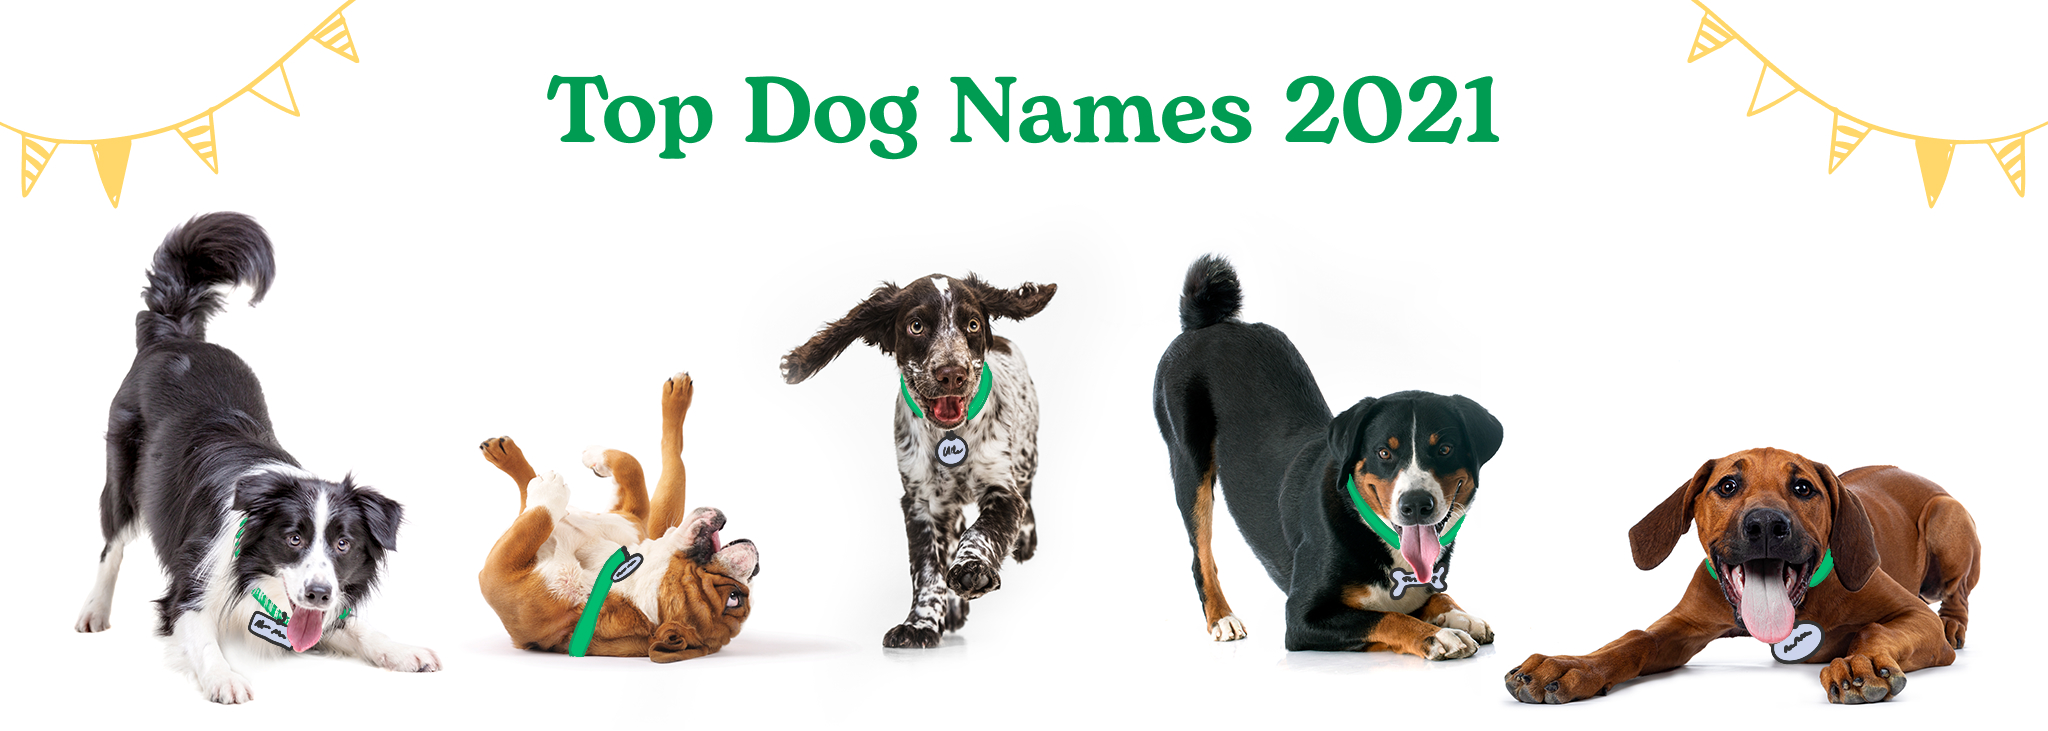 The Most Popular Dog Names of 2021